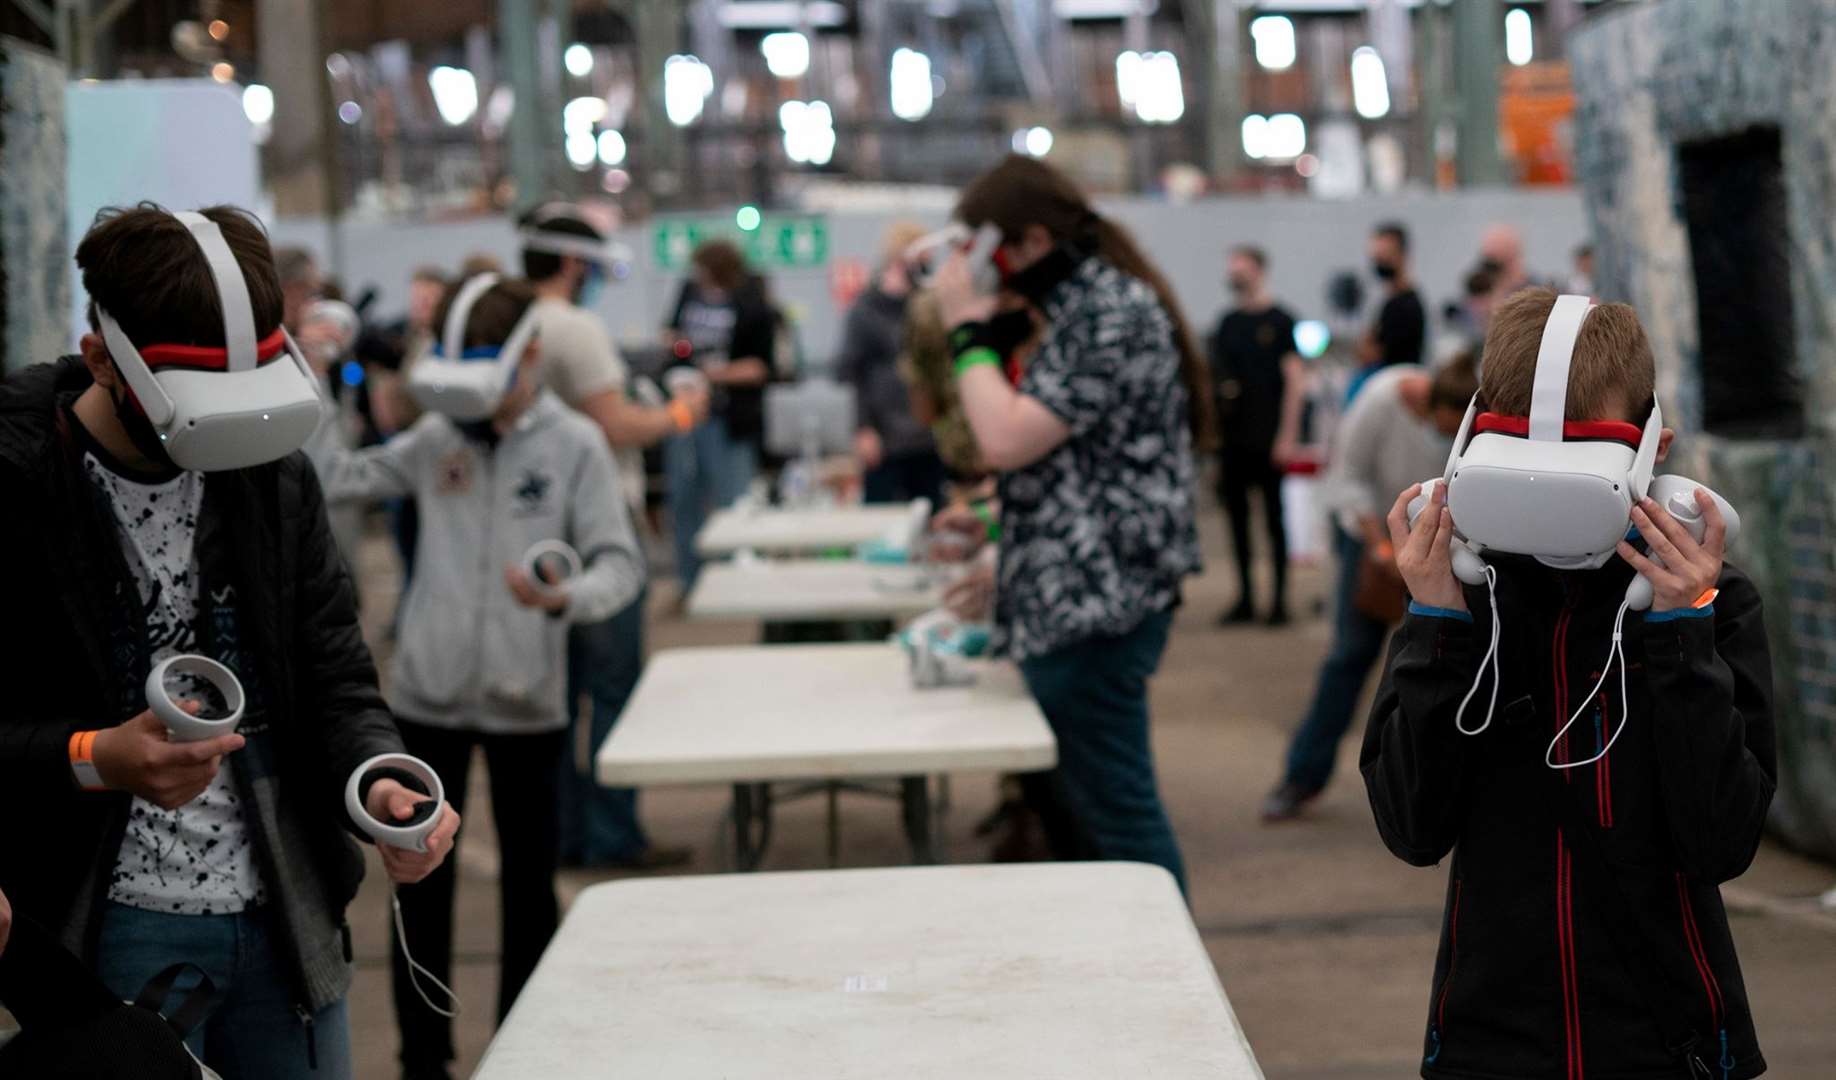 Retro, tabletop and VR games are all on offer at the Medway Gaming Festival. Picture: Historic Dockyard Chatham